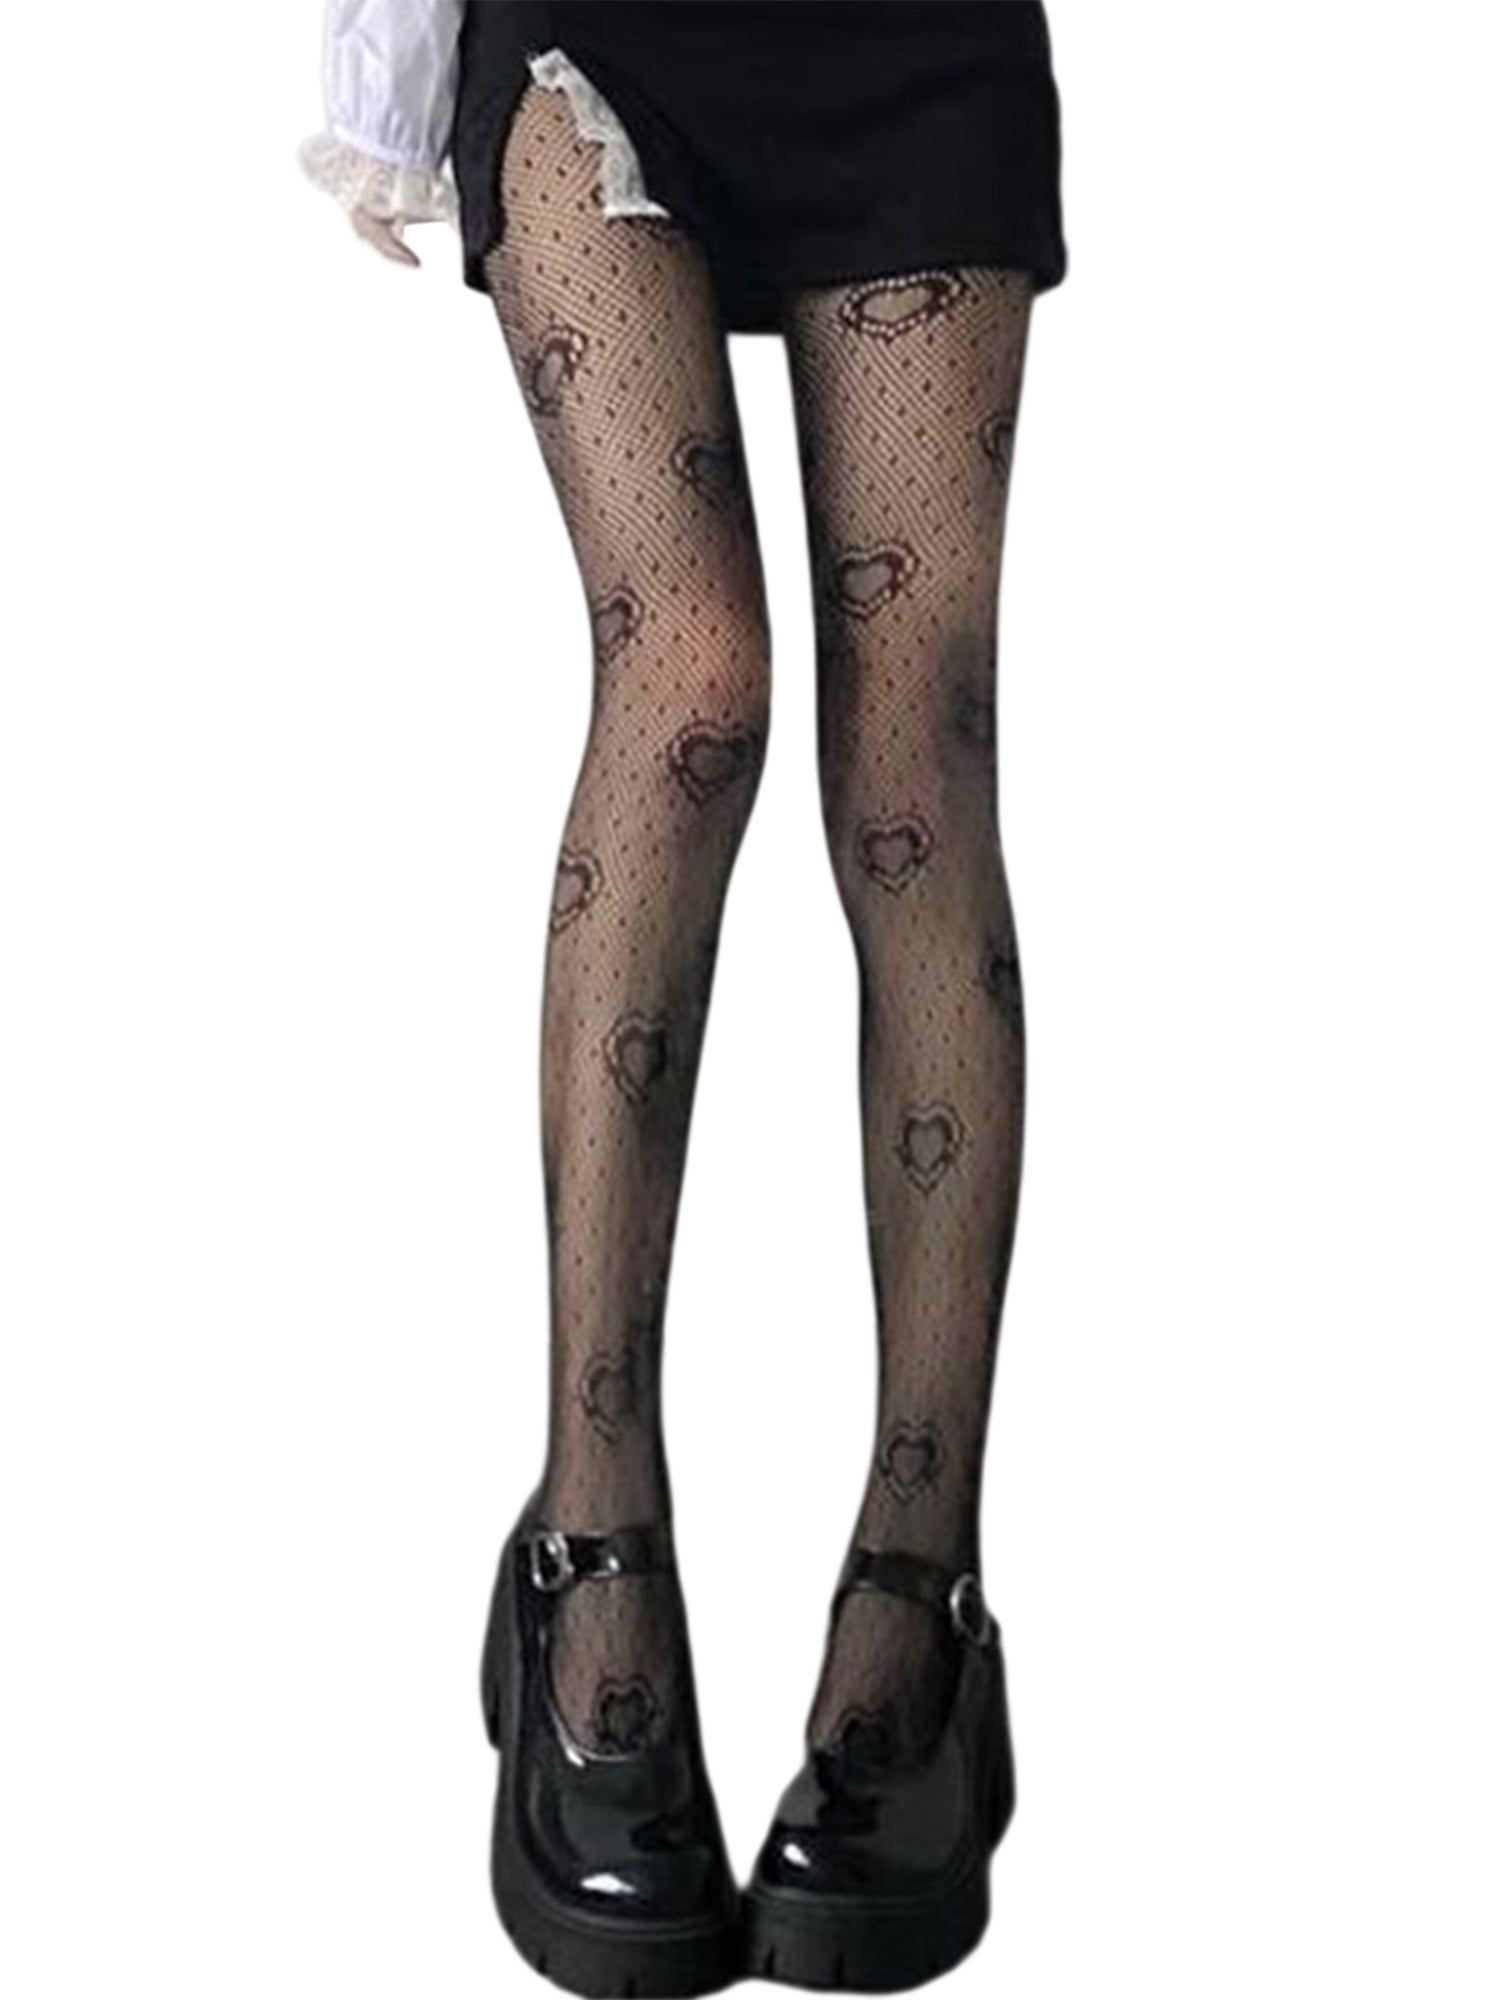 Women's Patterned Pantyhose High Waist Sheer Tights Fishnet Floral ...